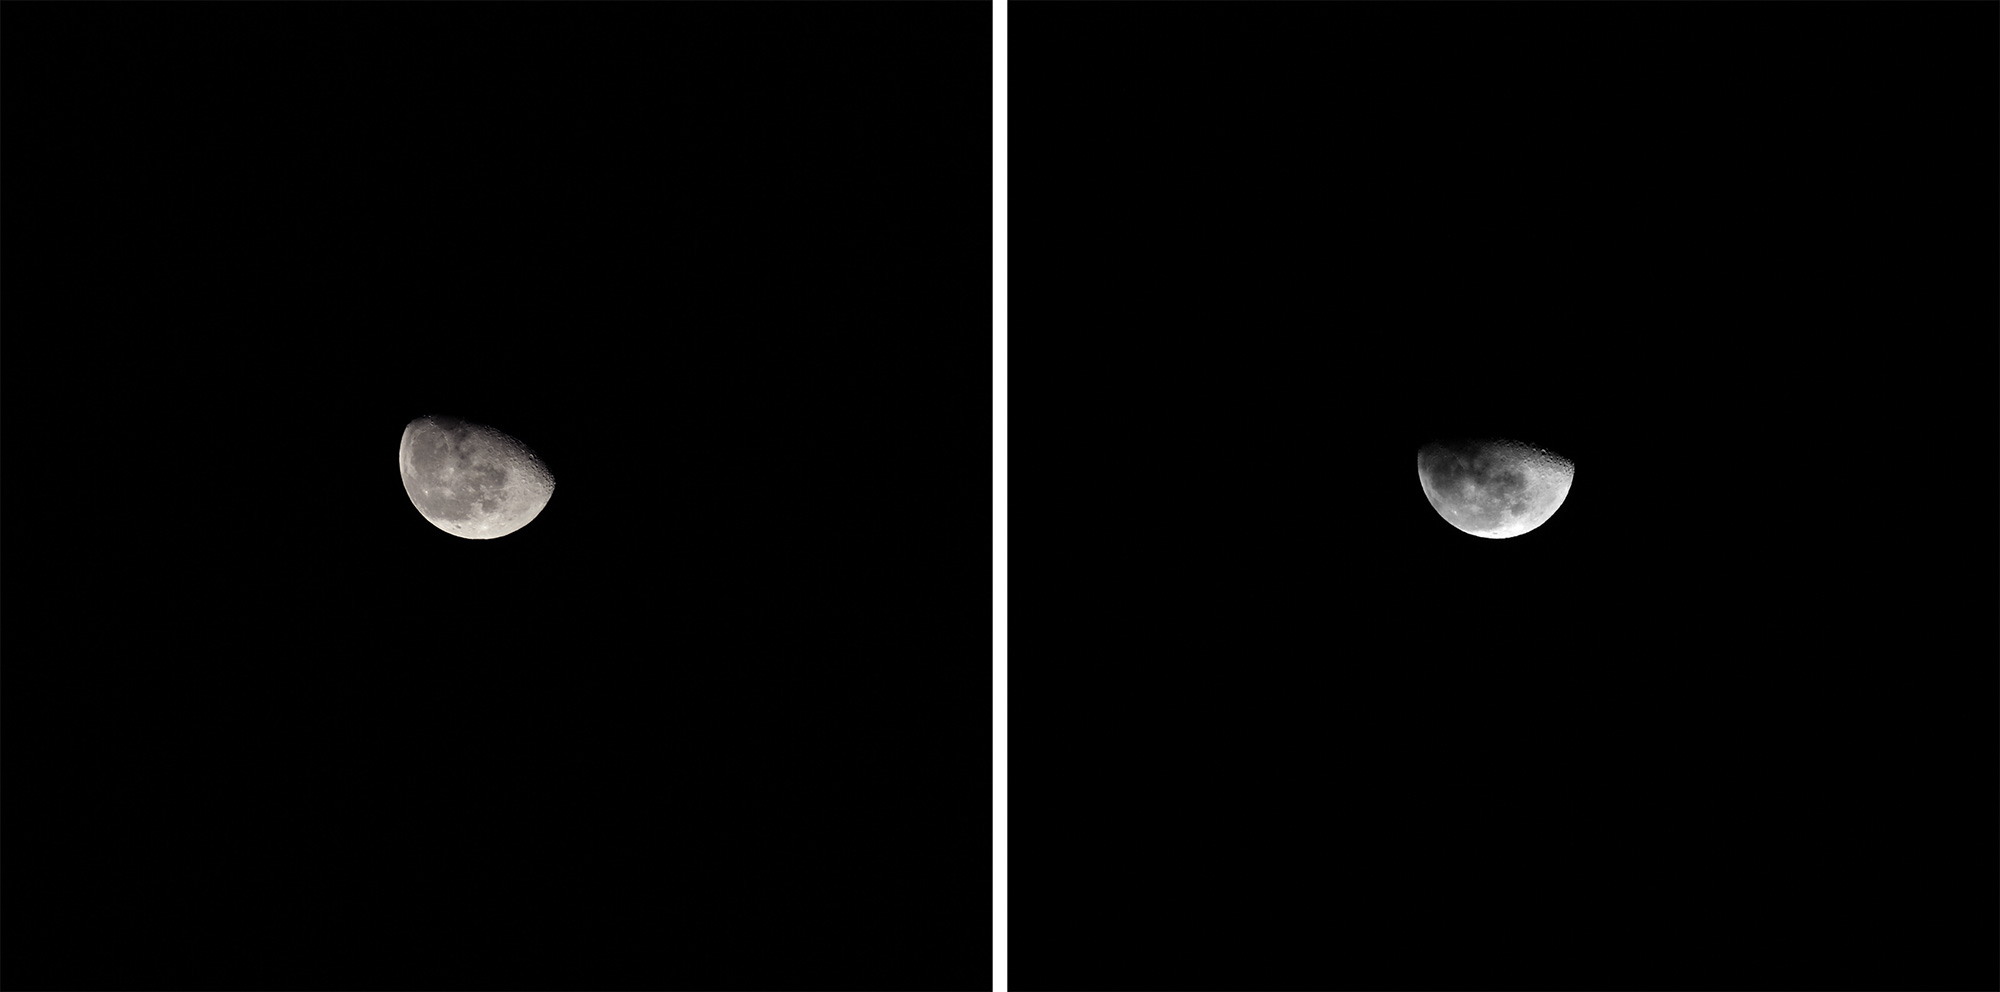 Diptych of photographs of the moon, by JLG